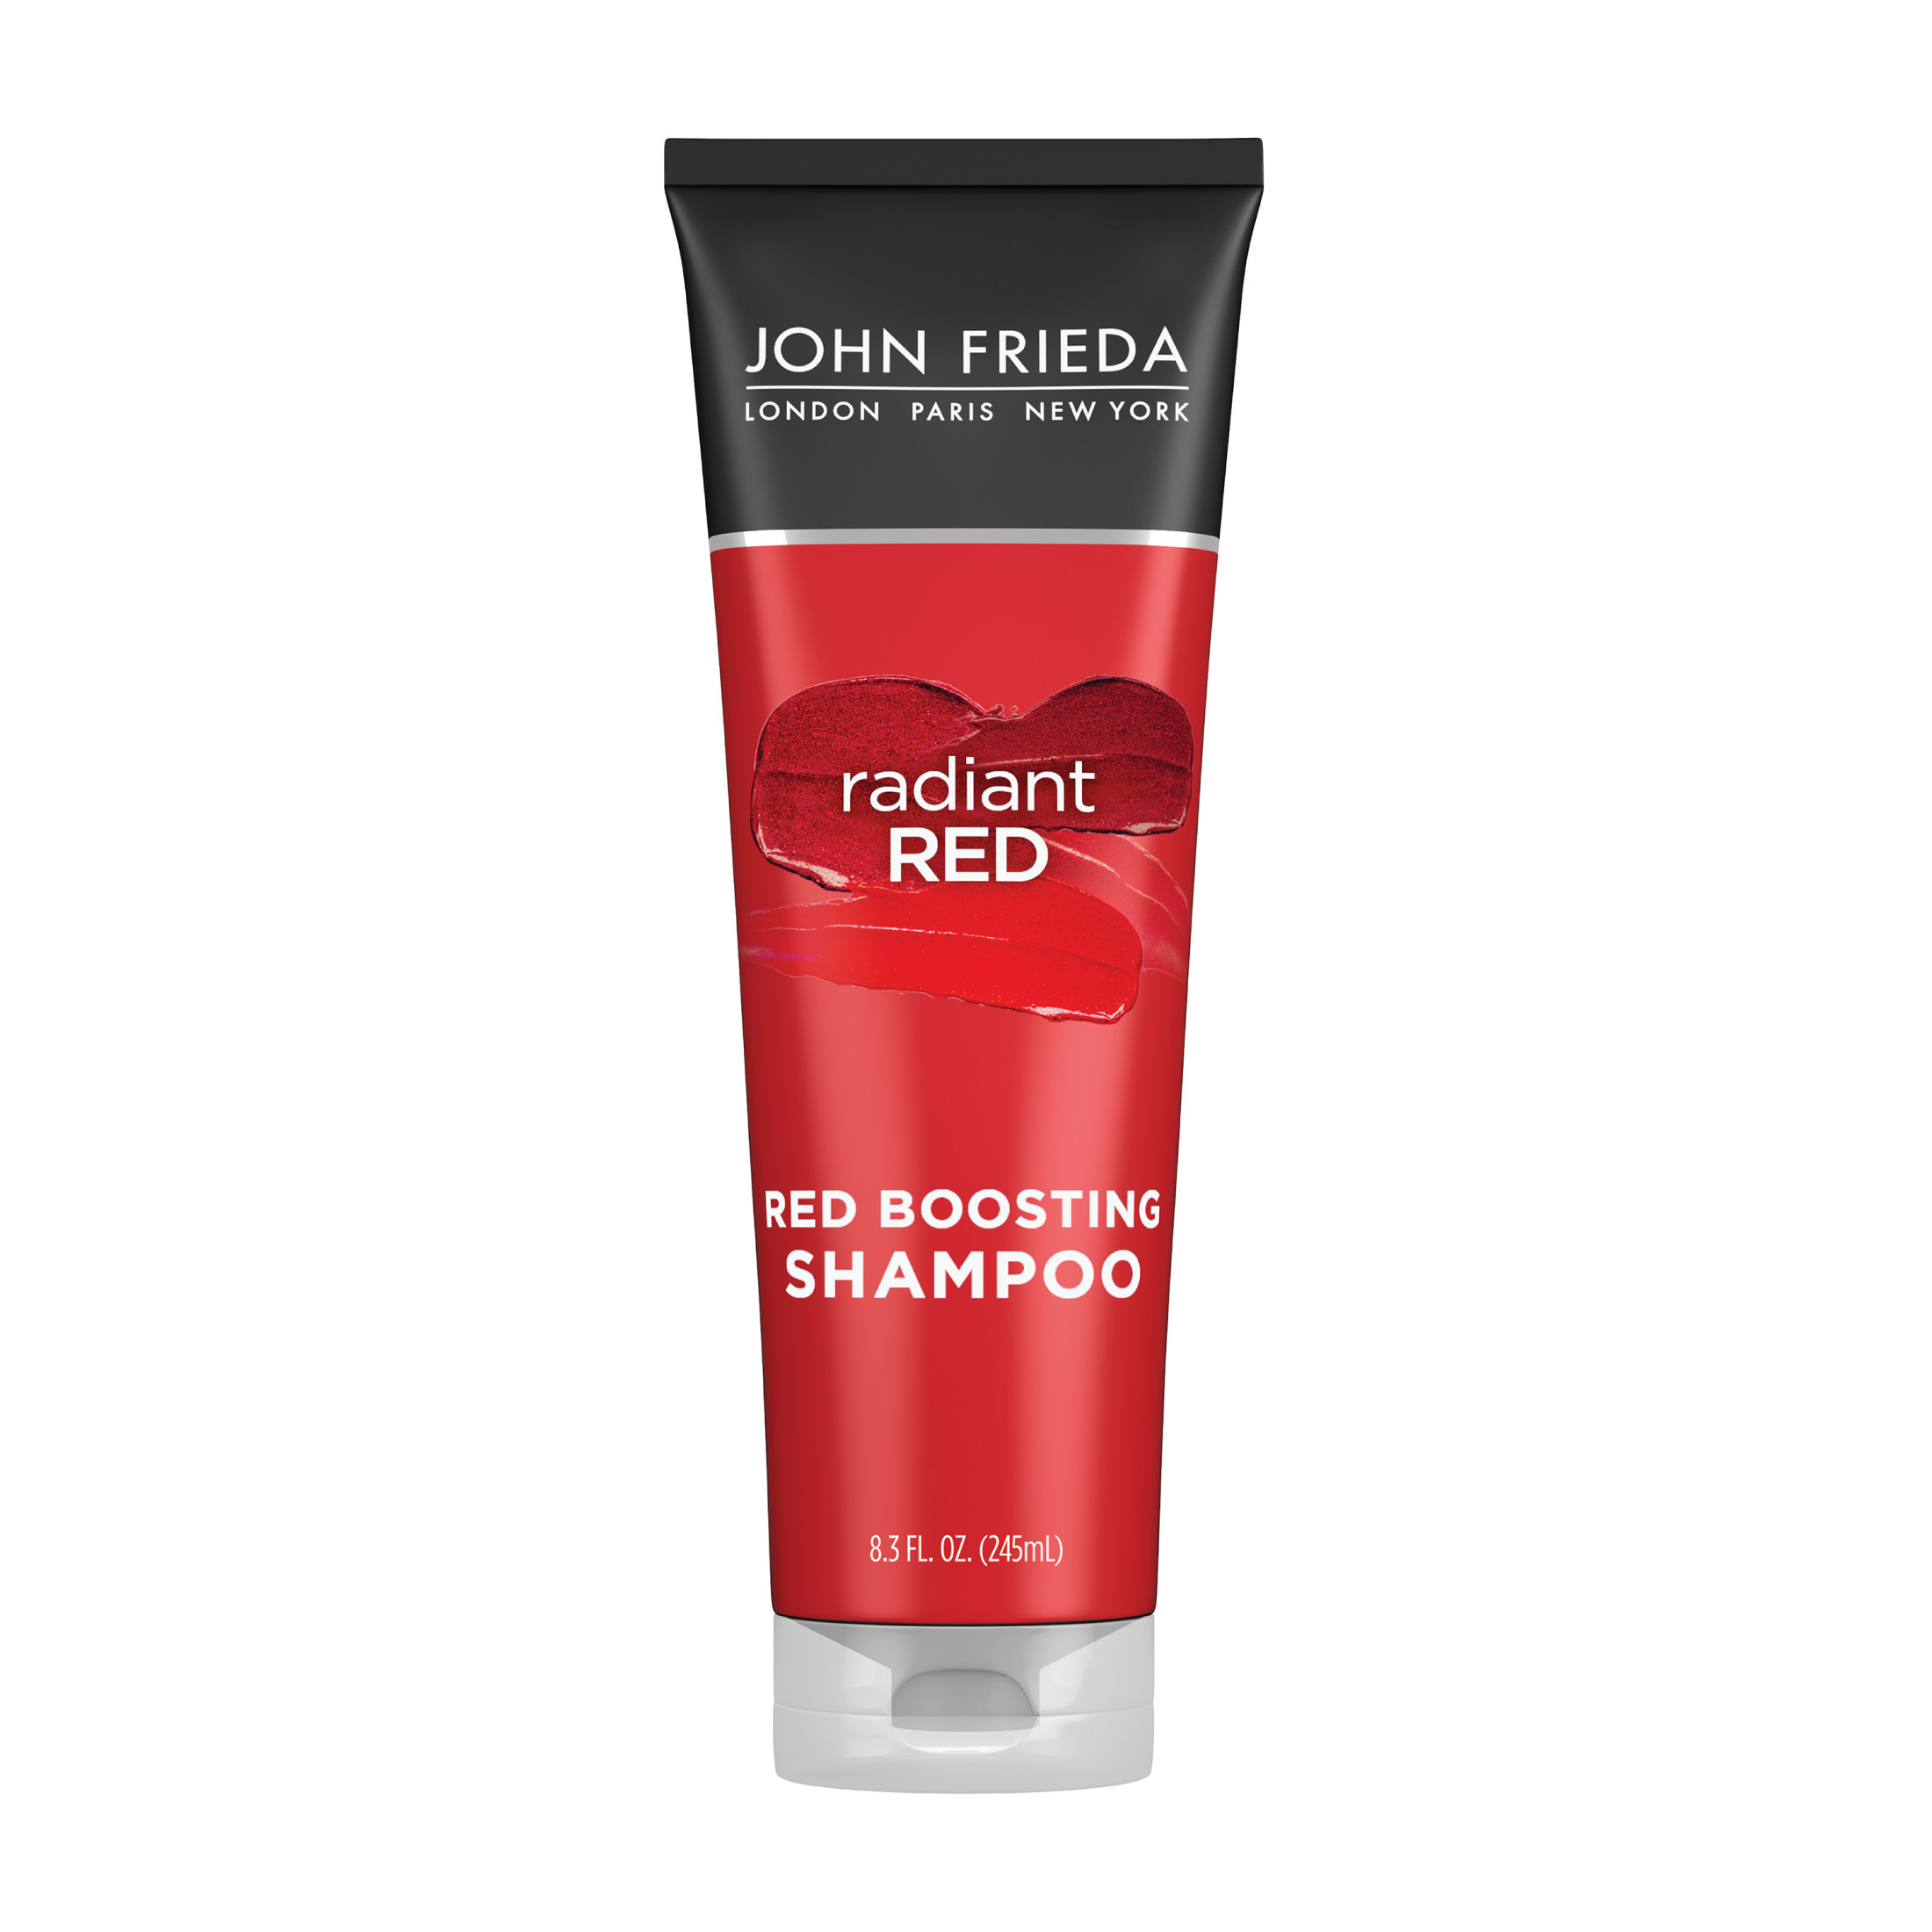 John Frieda Radiant Red Red Boosting Daily Shampoo, Color-Enhancing Shampoo for Red Hair, 8.3 fl oz - image 1 of 8